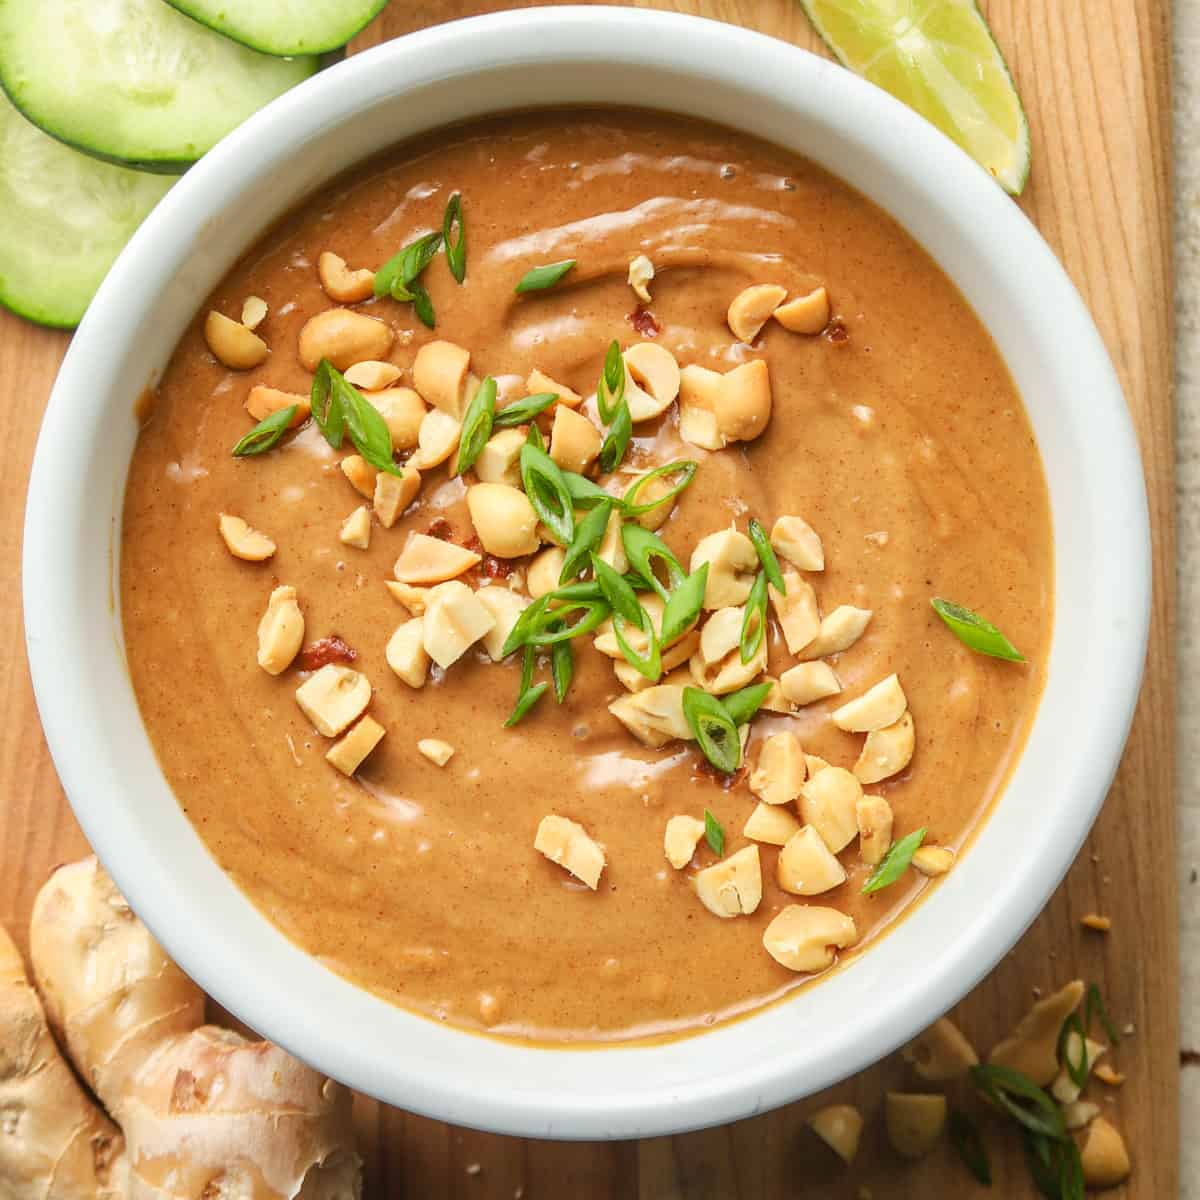 Bowl of Vegan Peanut Sauce topped with peanuts and scallions.